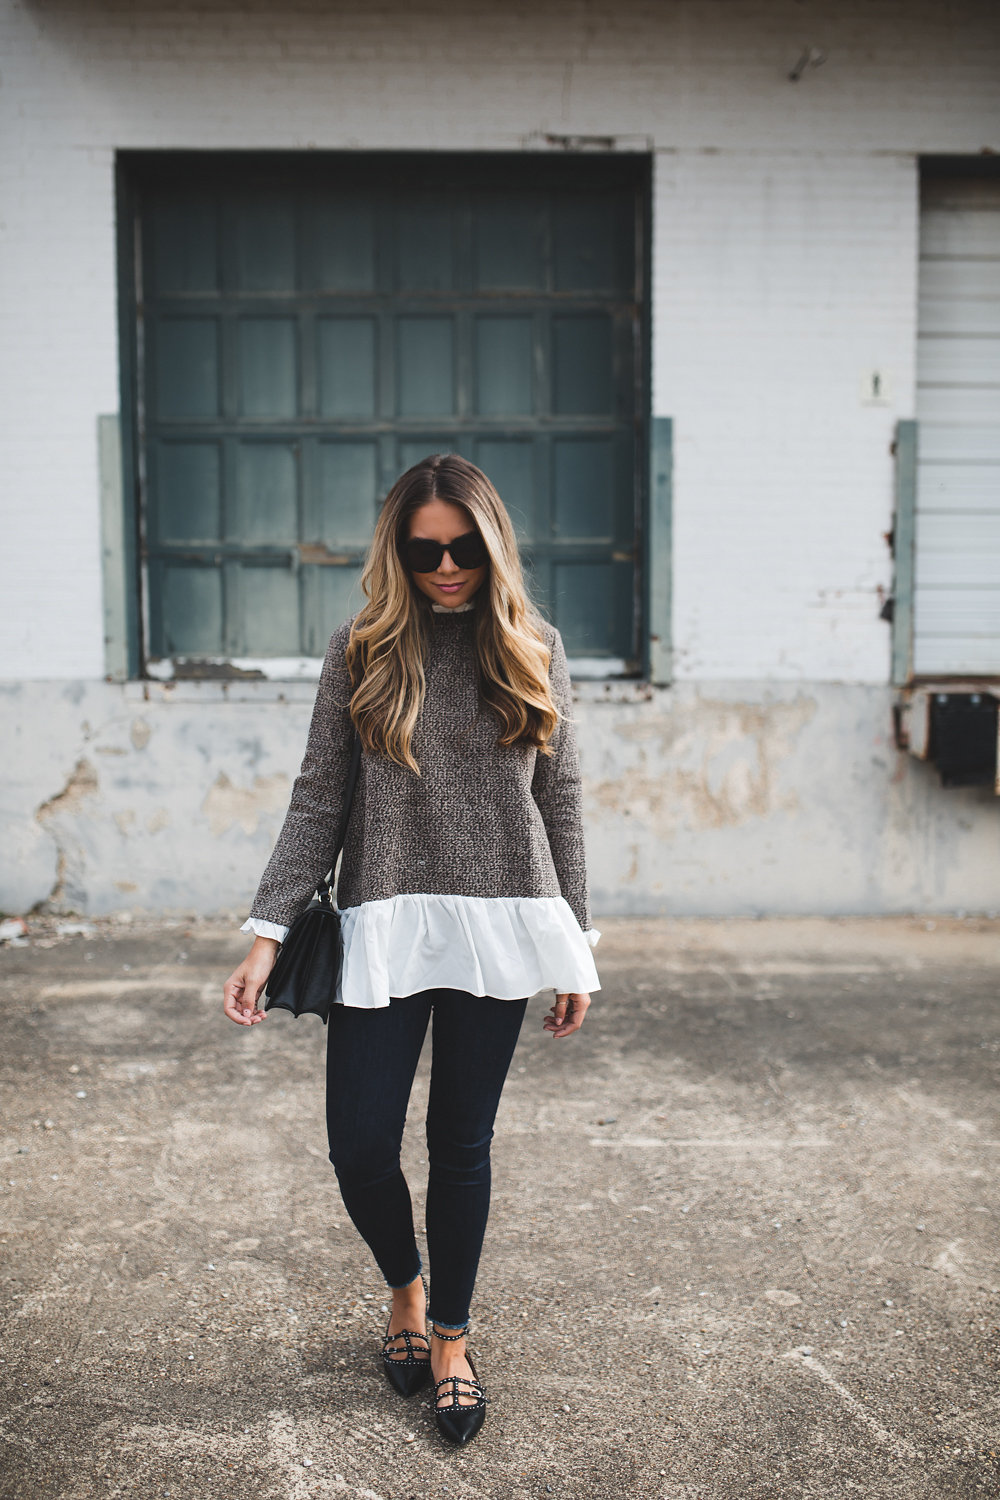 Le Fashion: Recreate This Easy Fall Look with Your Favorite